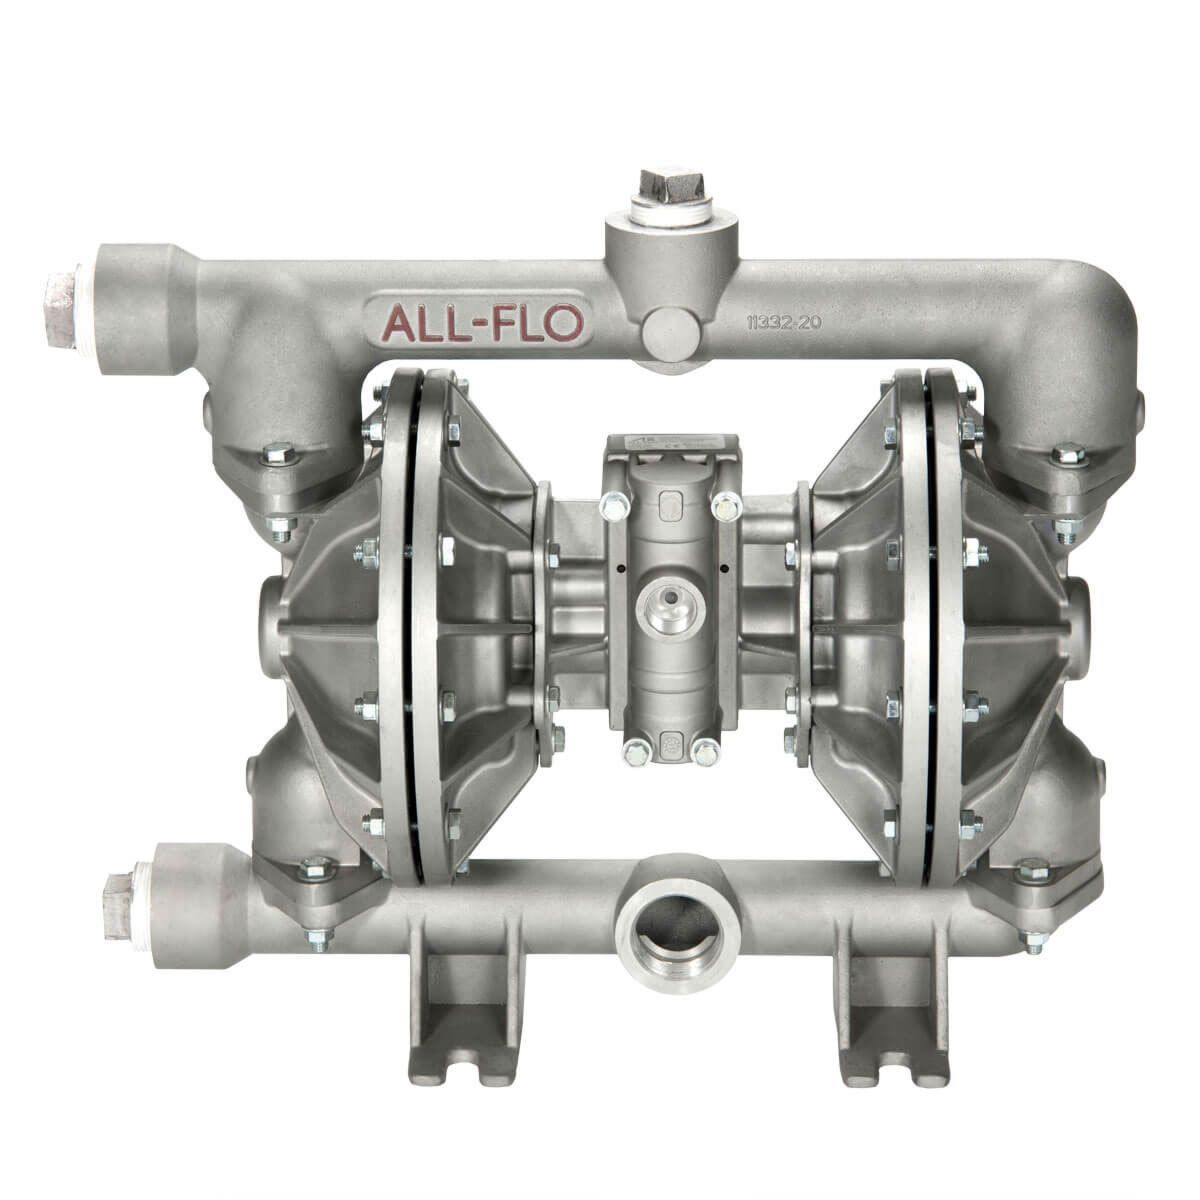 All-Flo A150-N33-SS3E-B70 Stainless Steel Air Operated Diaphragm Pump